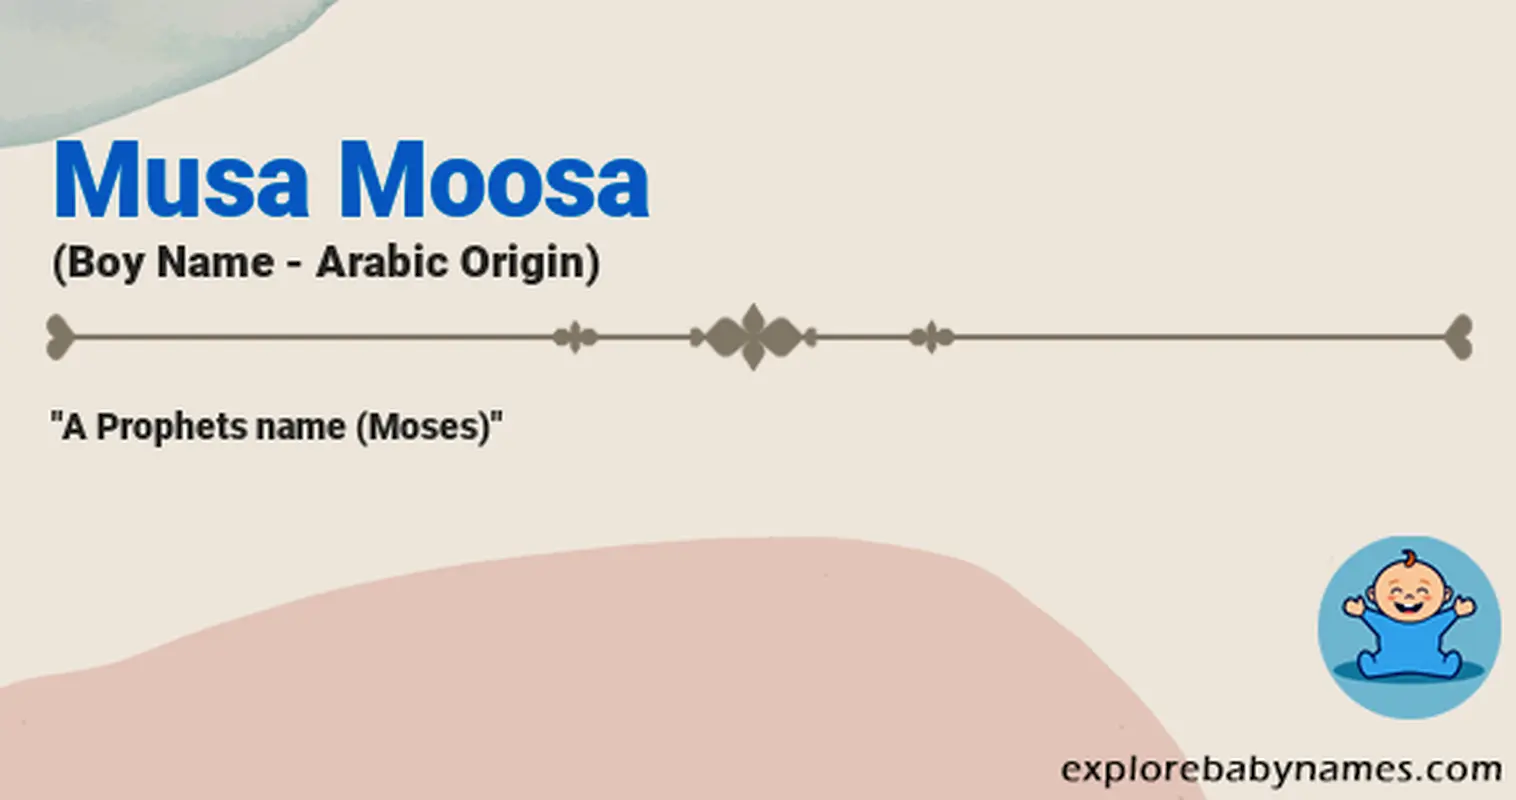 Meaning of Musa Moosa